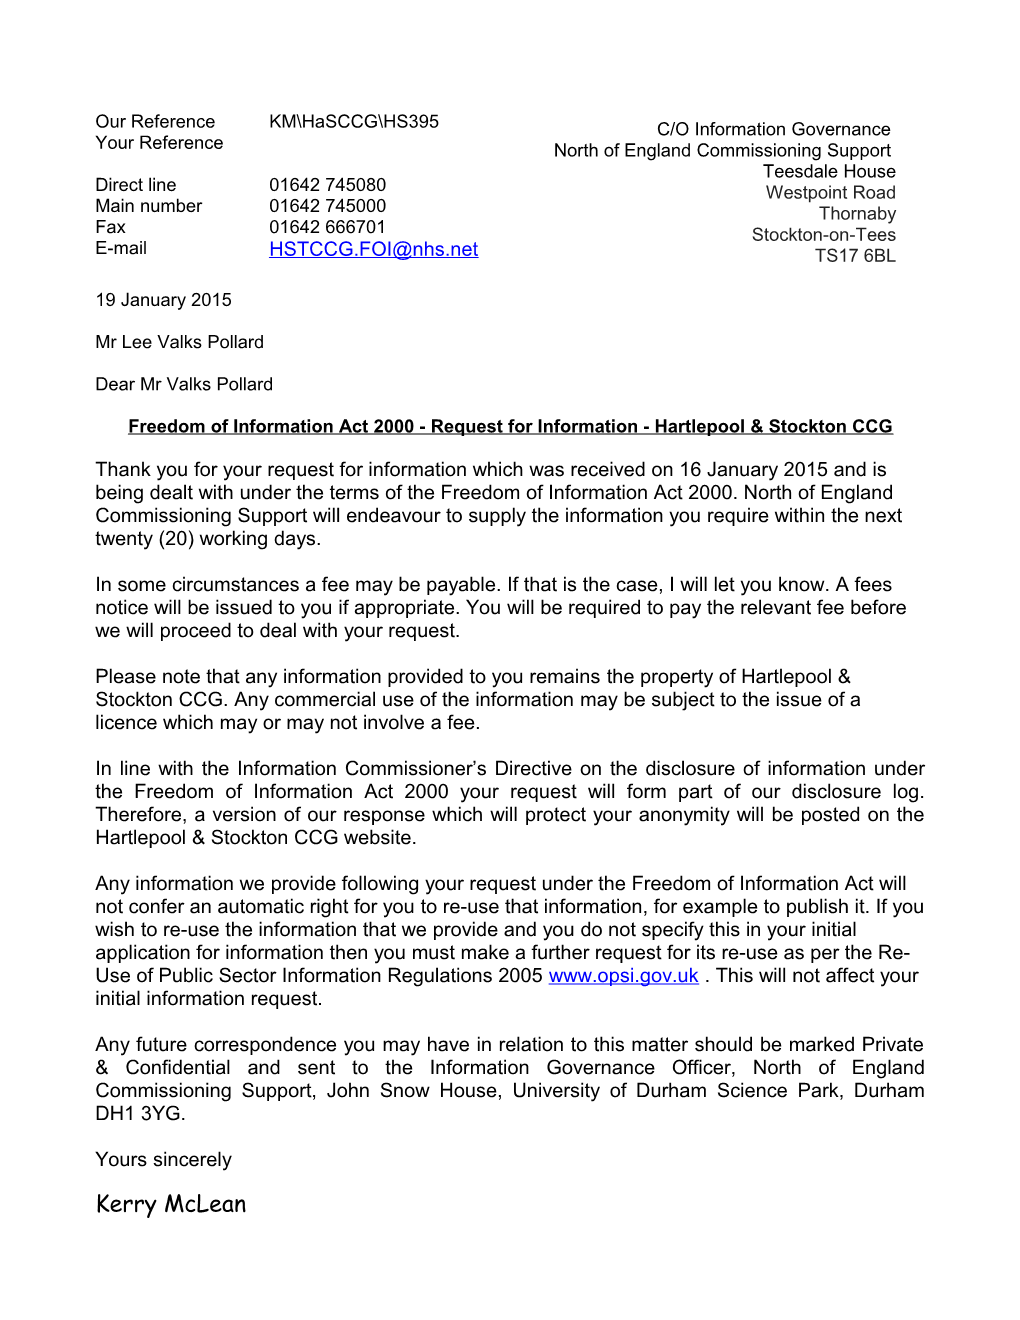 Freedom of Information Act 2000 - Request for Information - Hartlepool & Stockton CCG